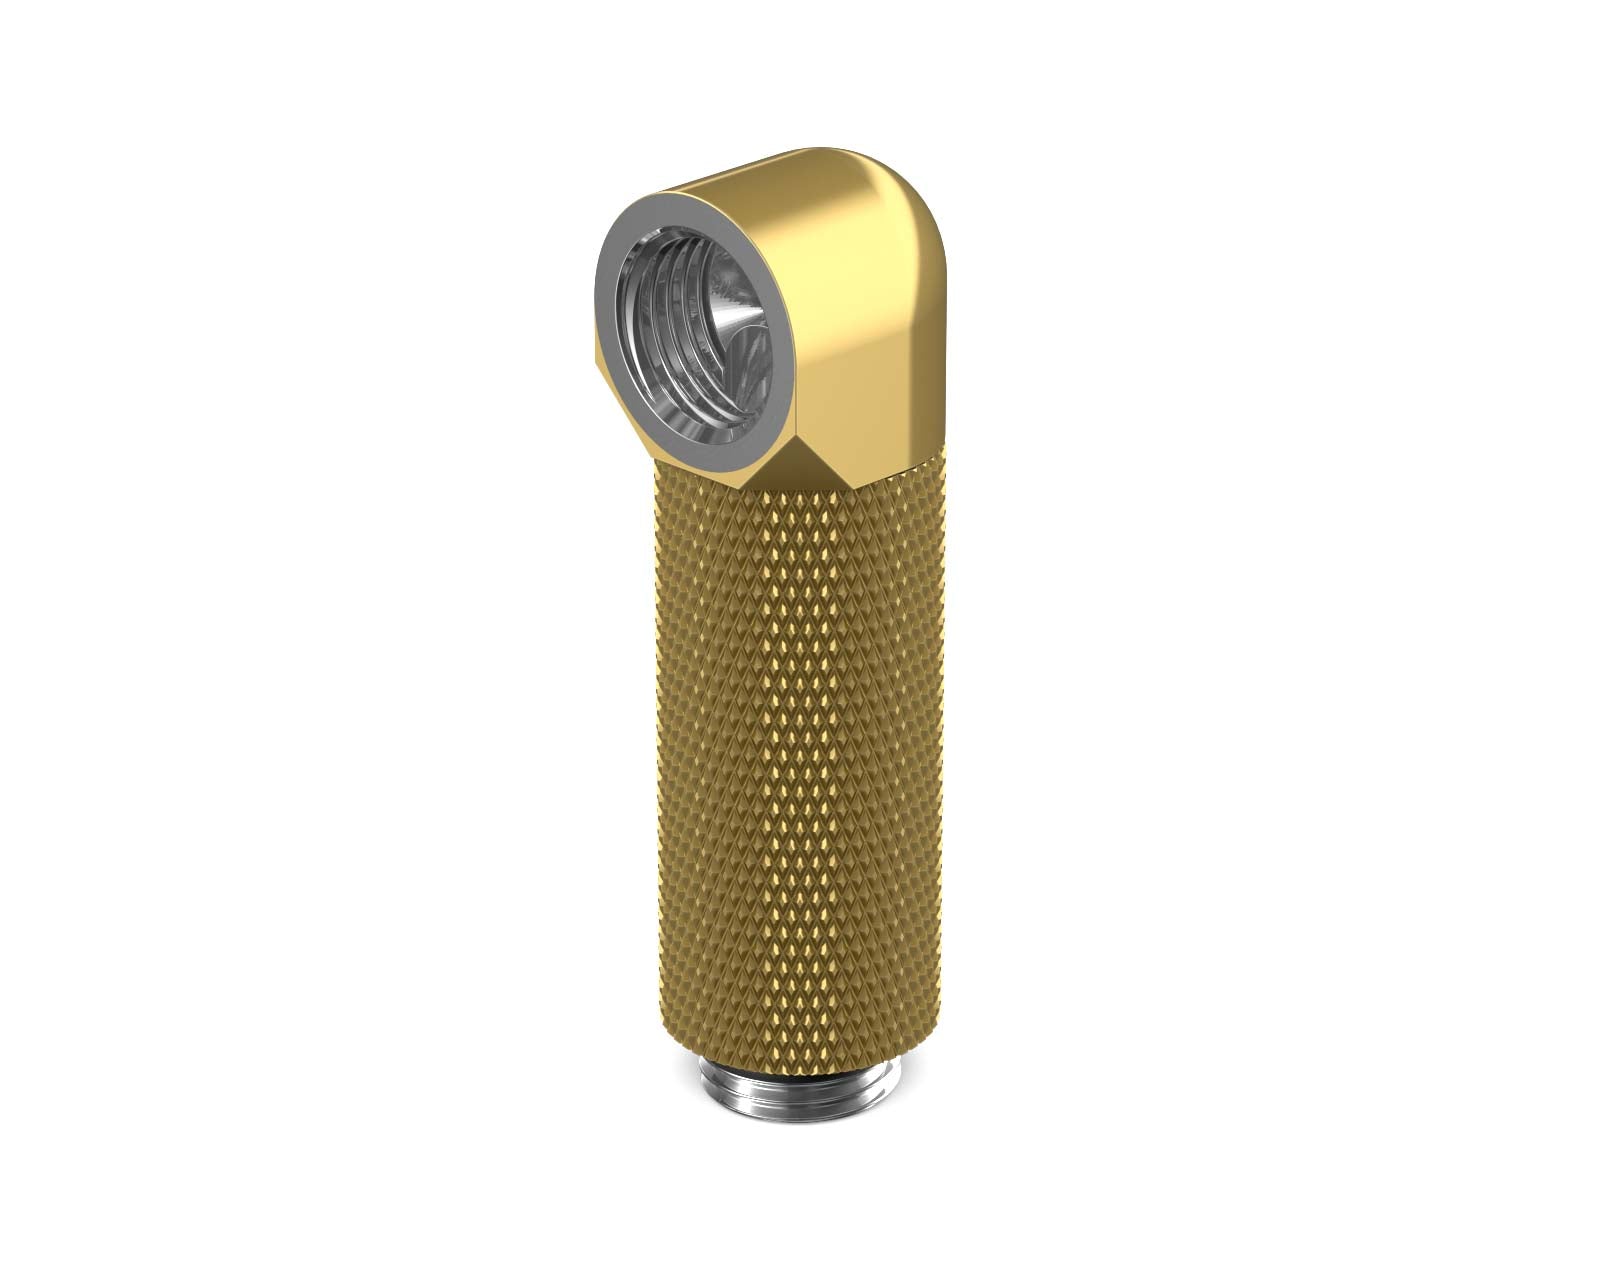 PrimoChill Male to Female G 1/4in. 90 Degree SX Rotary 40mm Extension Elbow Fitting - PrimoChill - KEEPING IT COOL Candy Gold